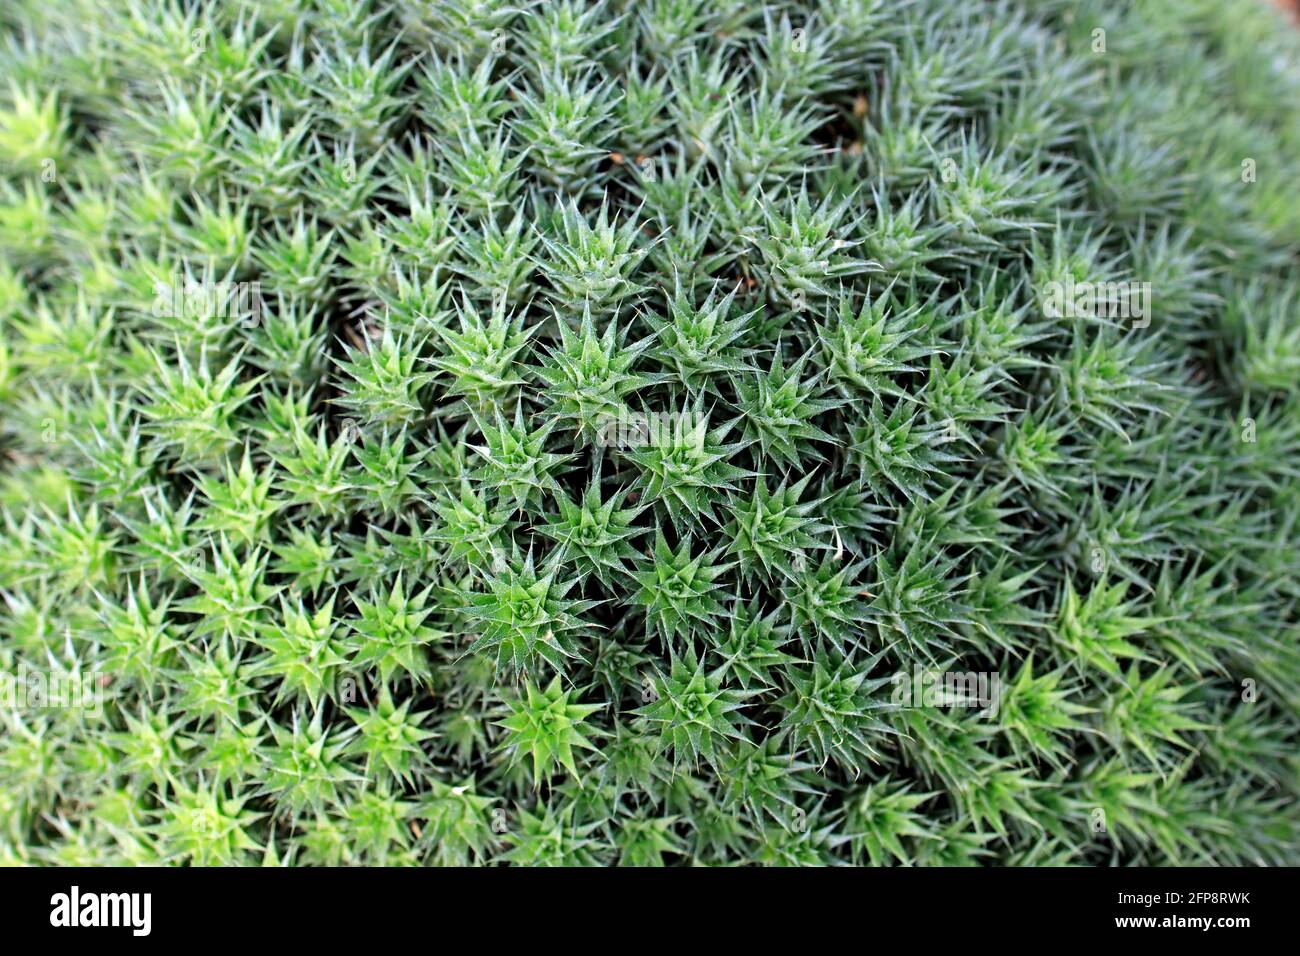 Abromeitiella chlorantha is low densely caespitose perennial cushion forming sub-succulent herb, peculiar terrestrial bromeliad that forms neat with h Stock Photo